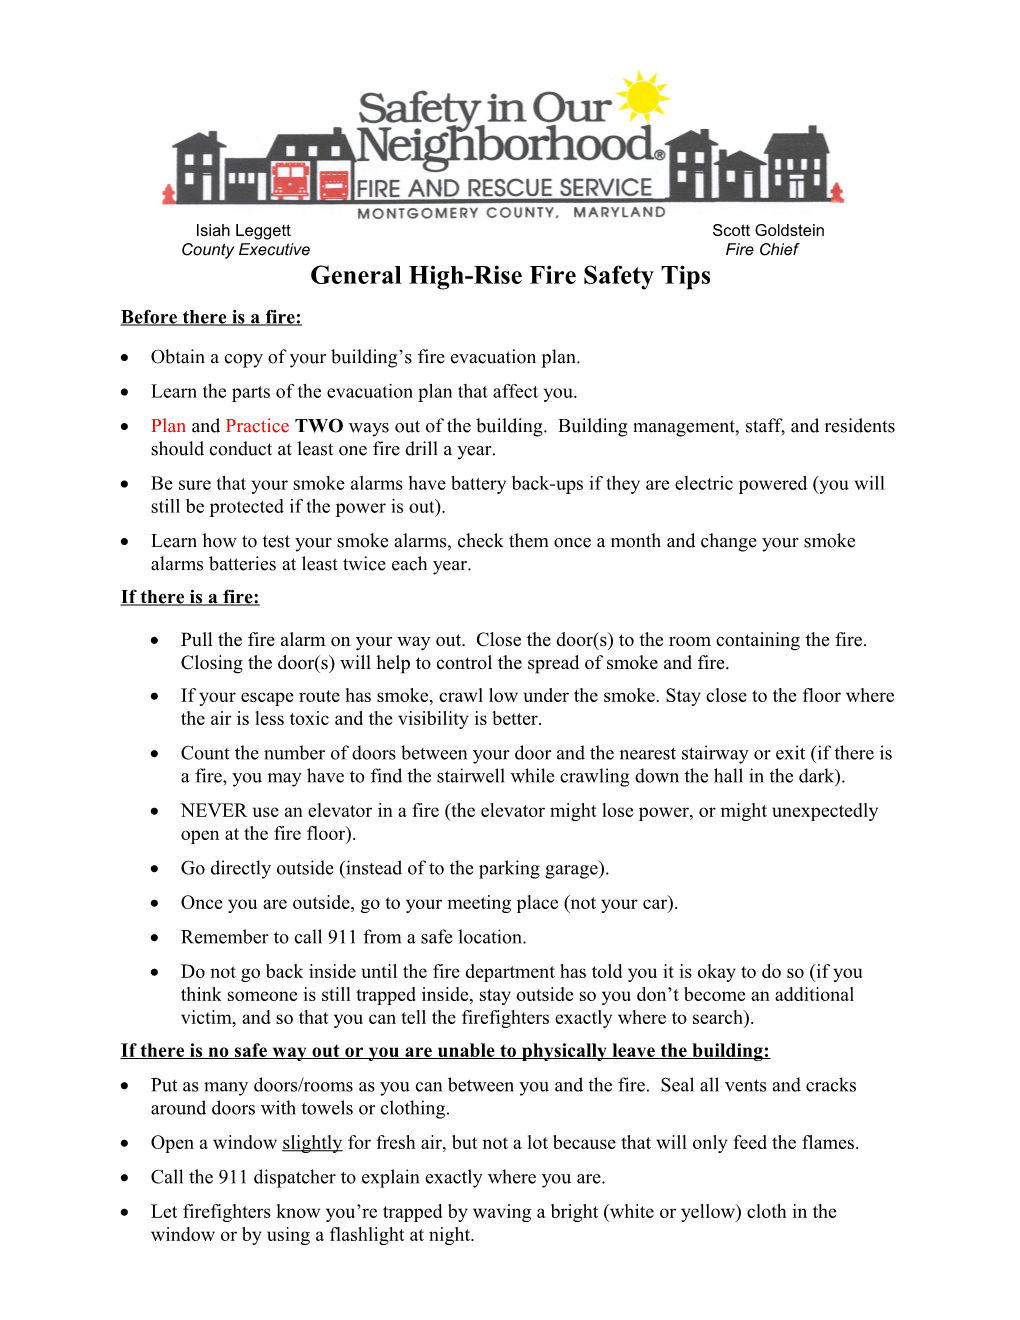 General High-Rise Fire Safety Tips